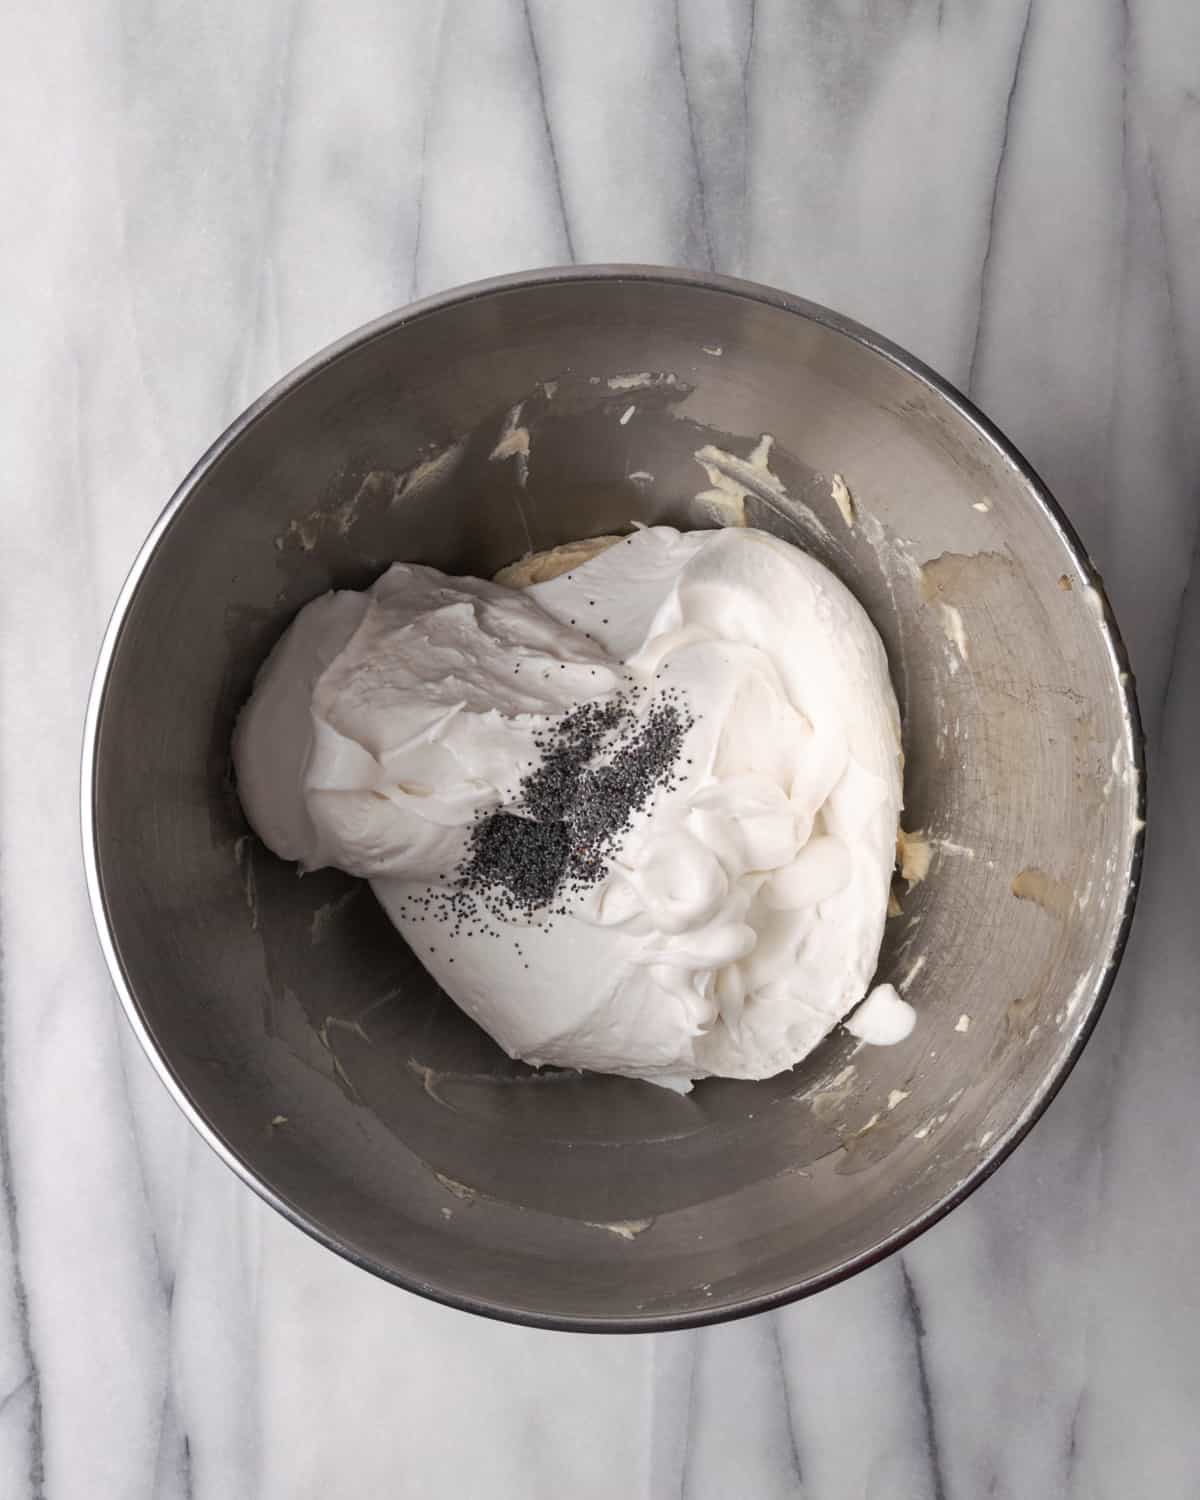 Whipped cream and poppy seeds added to a metal mixing bowl with cream cheese.